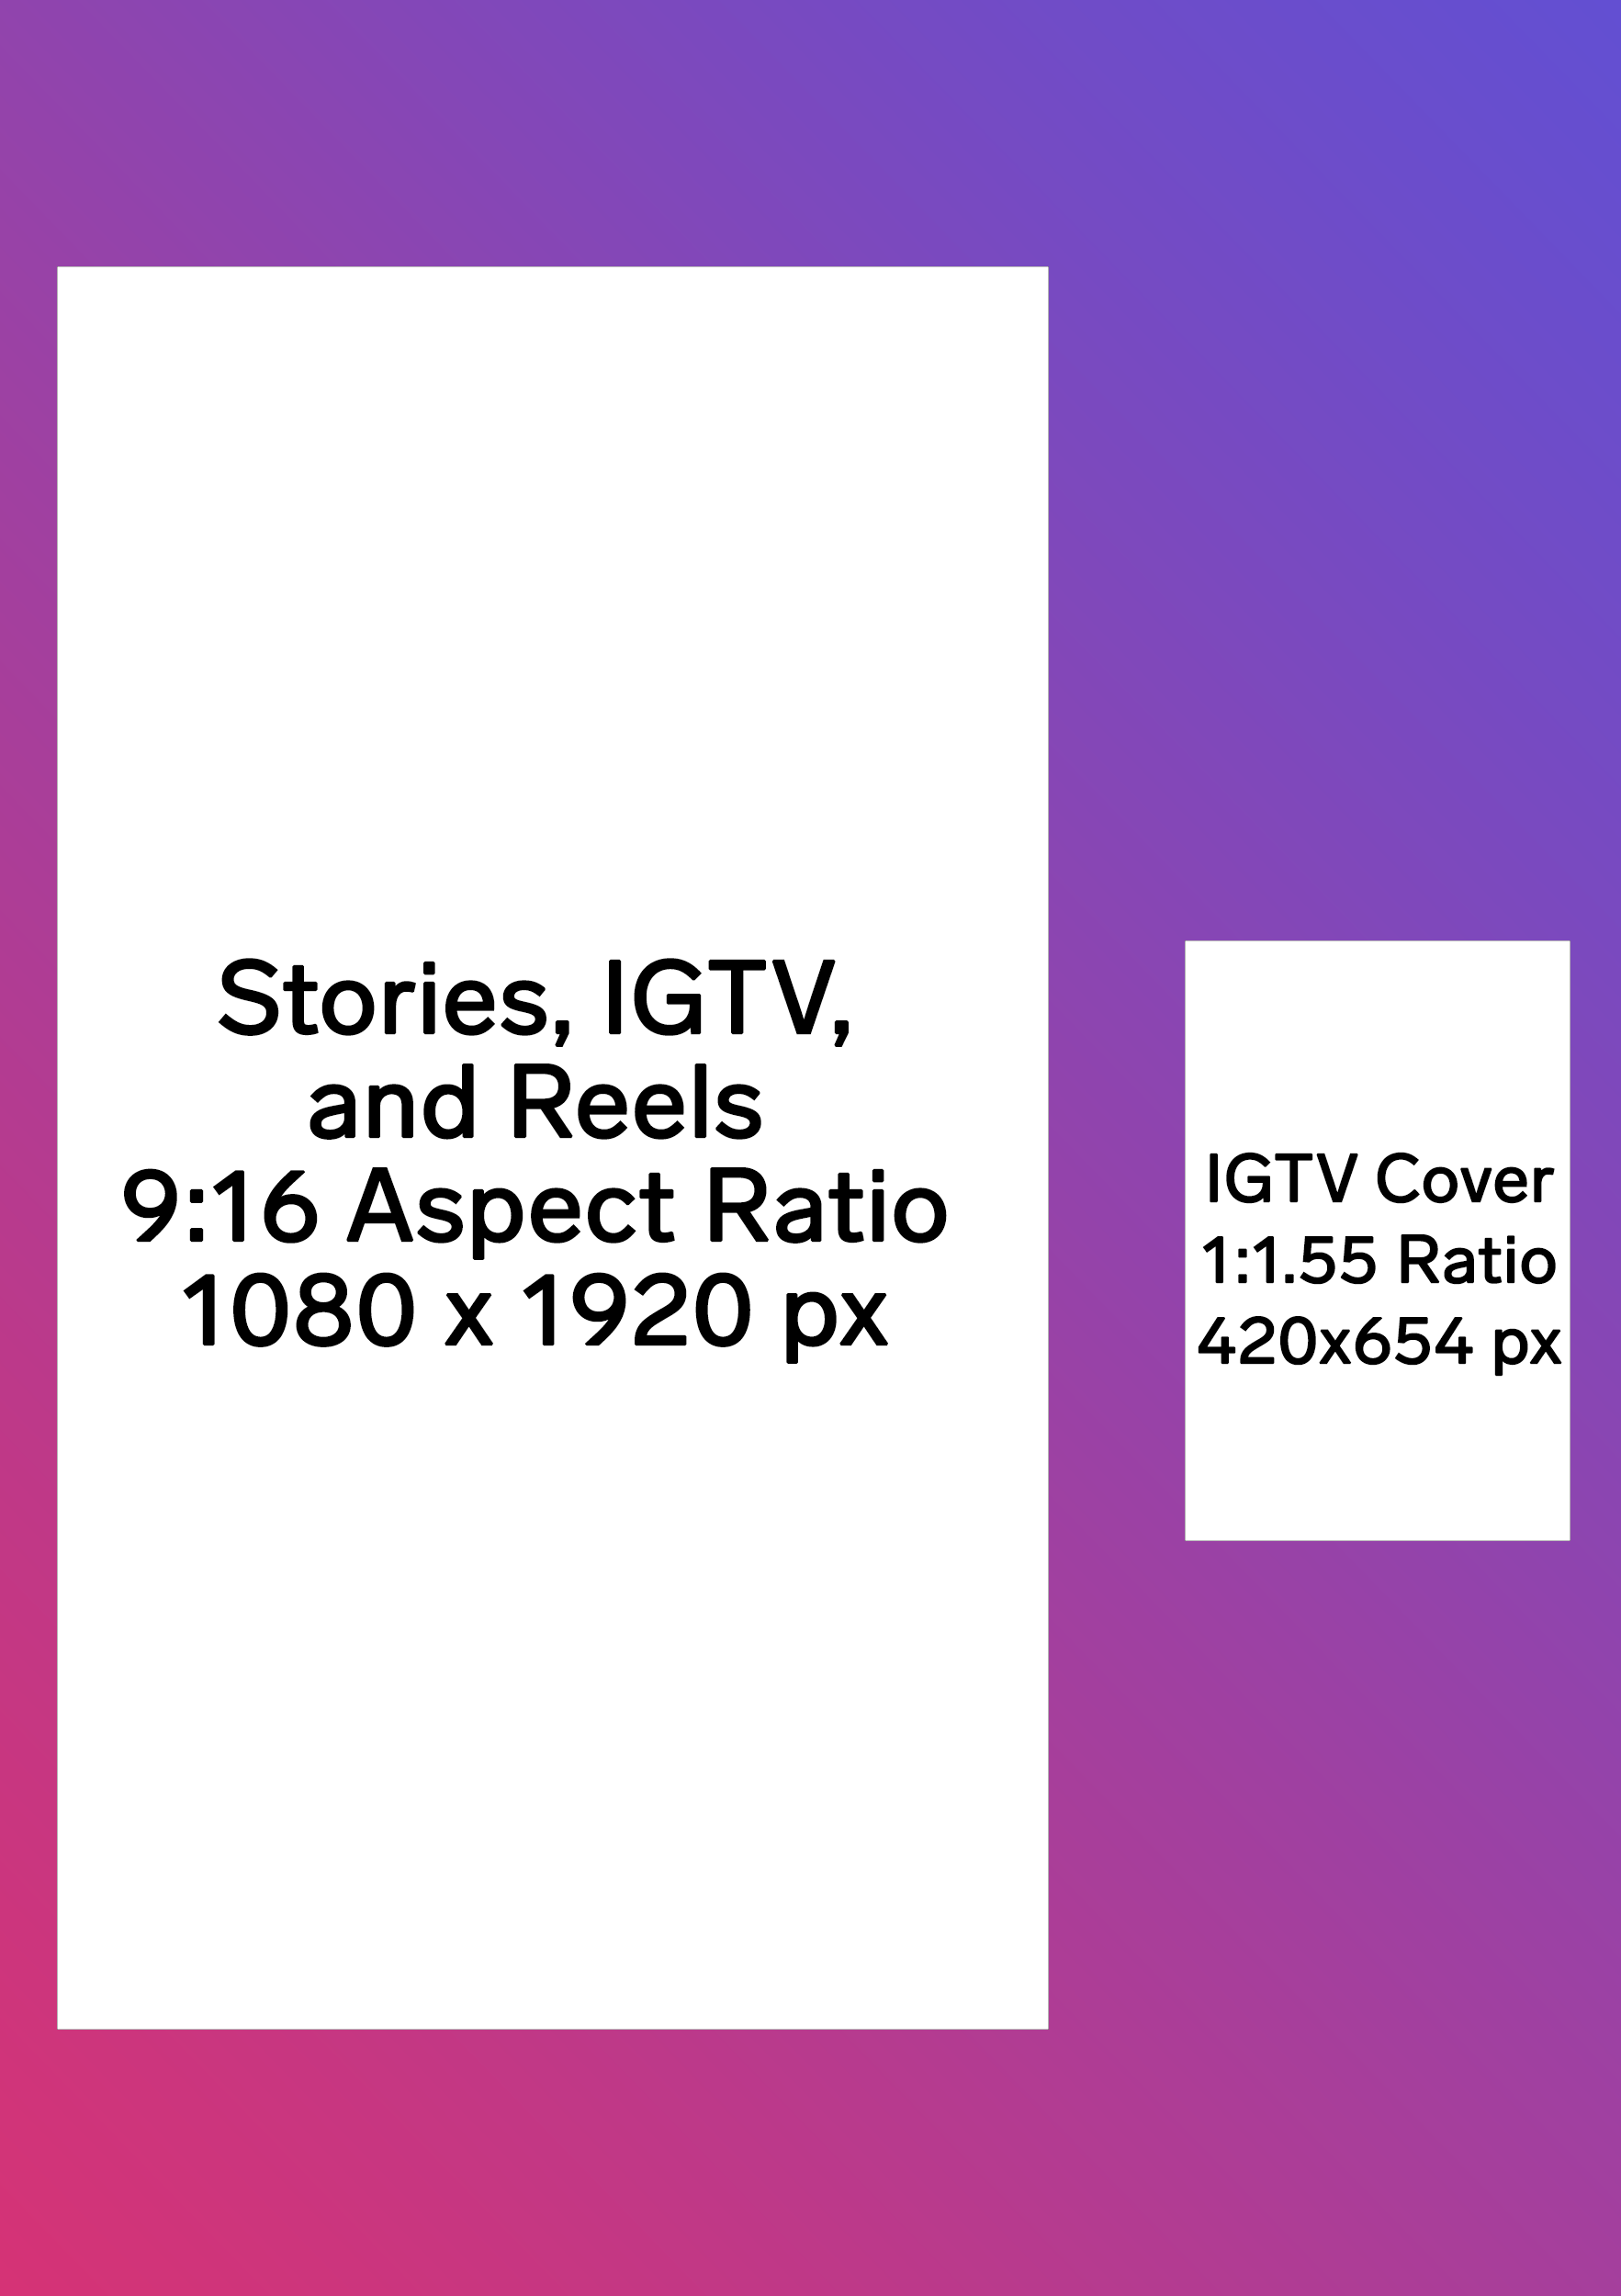 Two rectangles, showing the size of Instagram Stories, IGTV, and Reels posts; and IGTV cover photos.